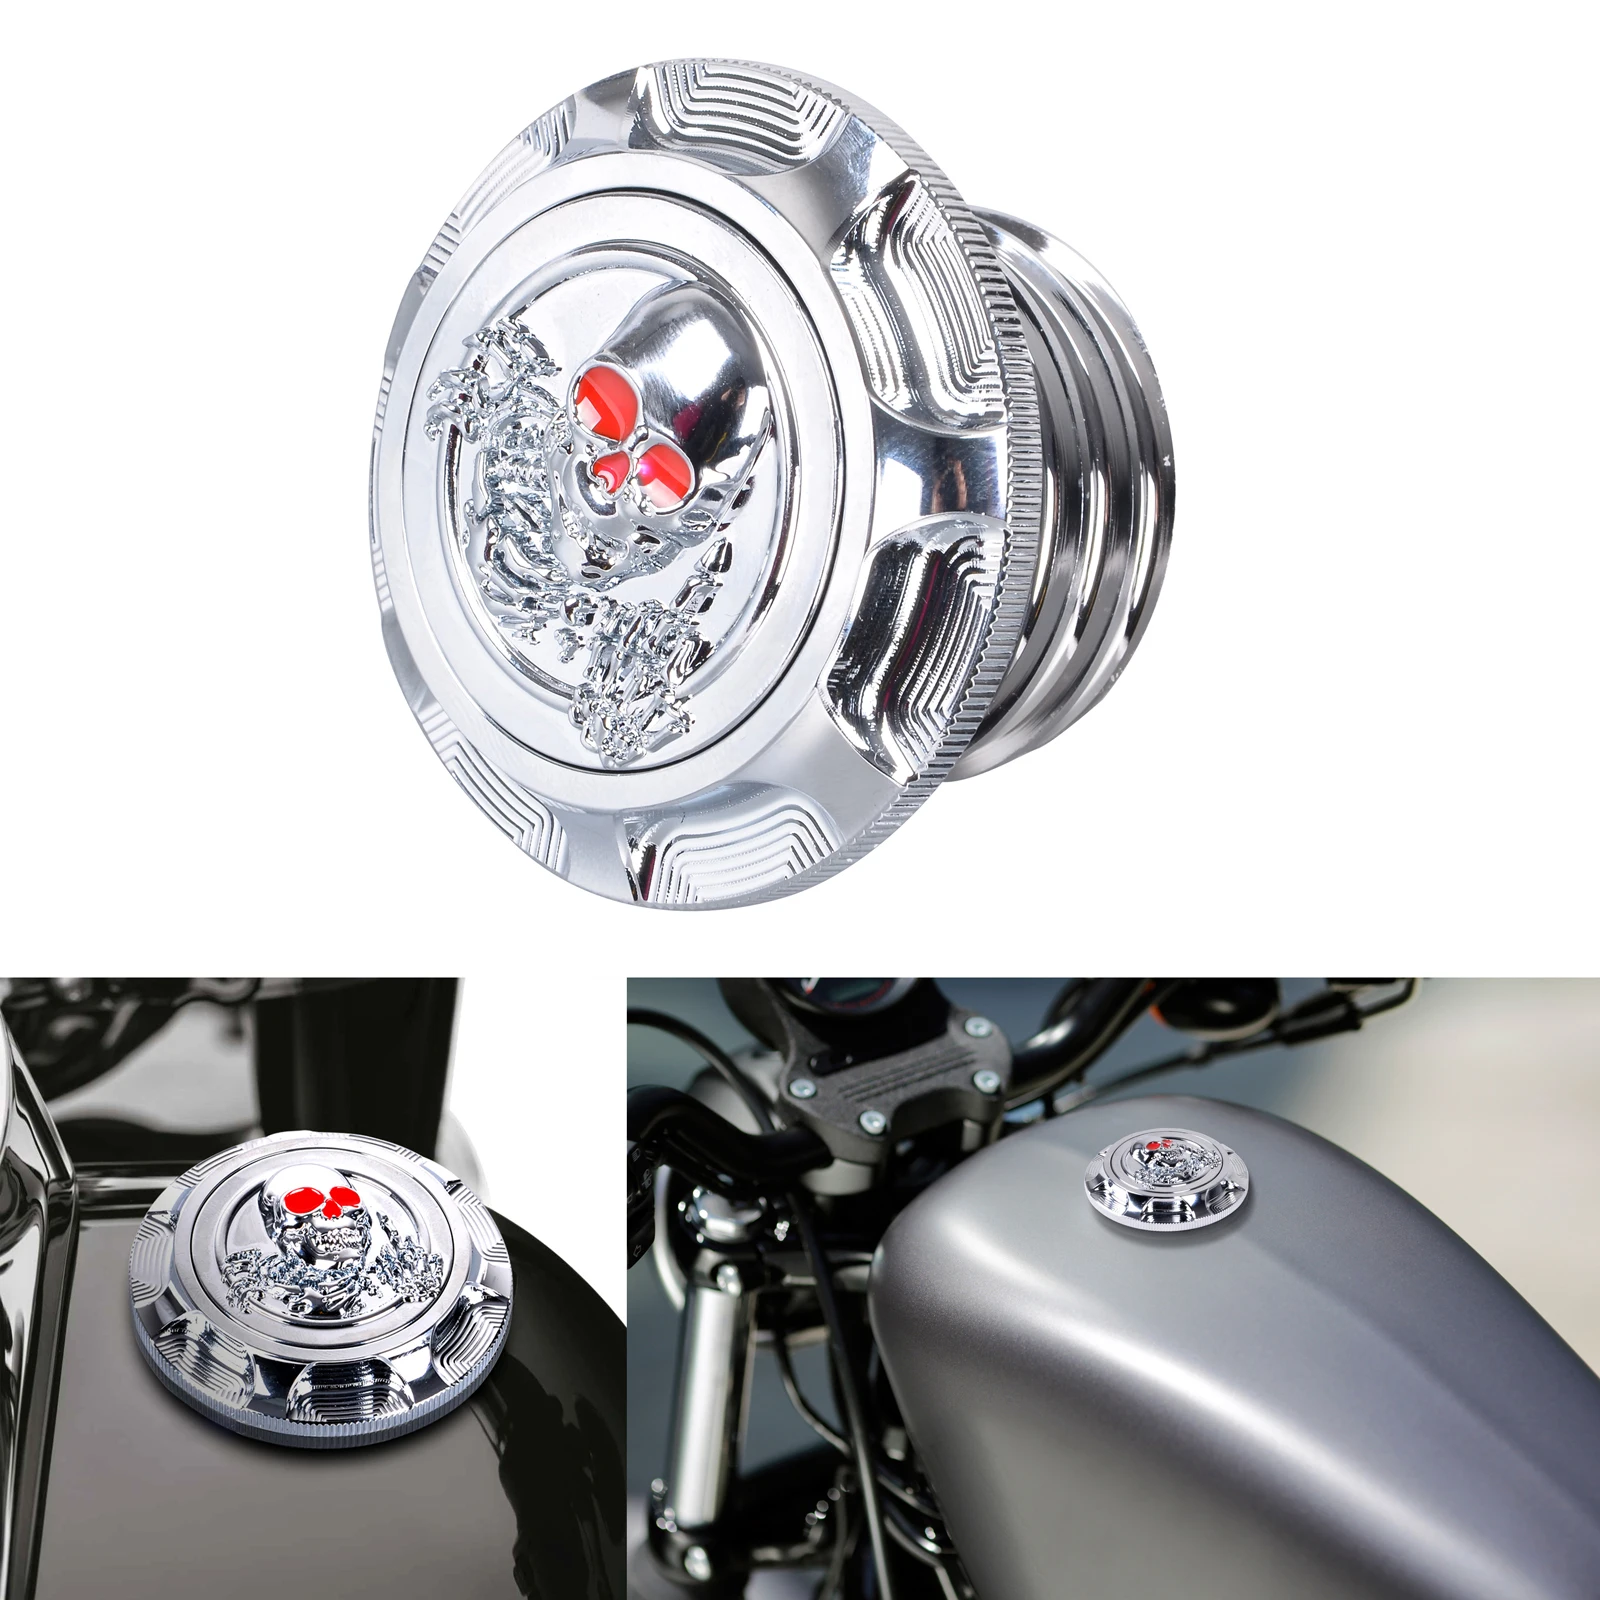 

3D Motorcycle Skull Fuel Gas Tank Cover Decorative Oil Cap Fit for Harley Sportster XL 1200 883 X48 Dyna Softail Touring FLHR